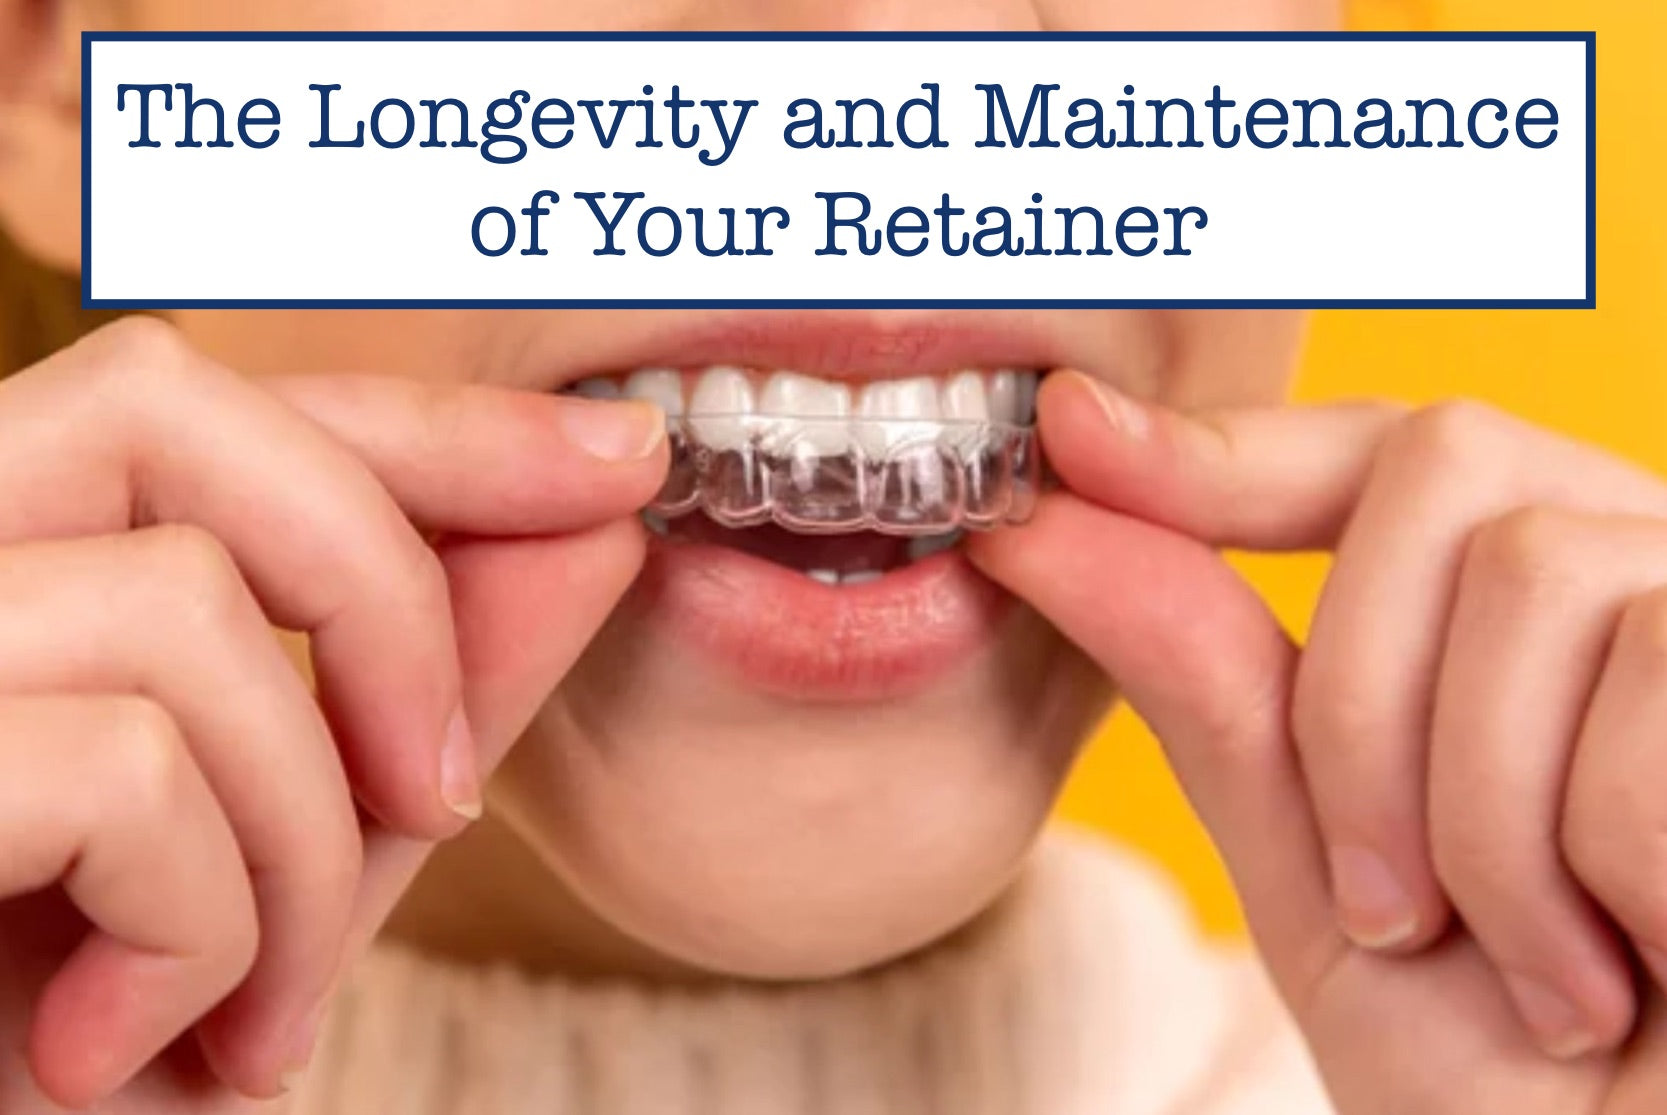 The Longevity and Maintenance of Your Retainer